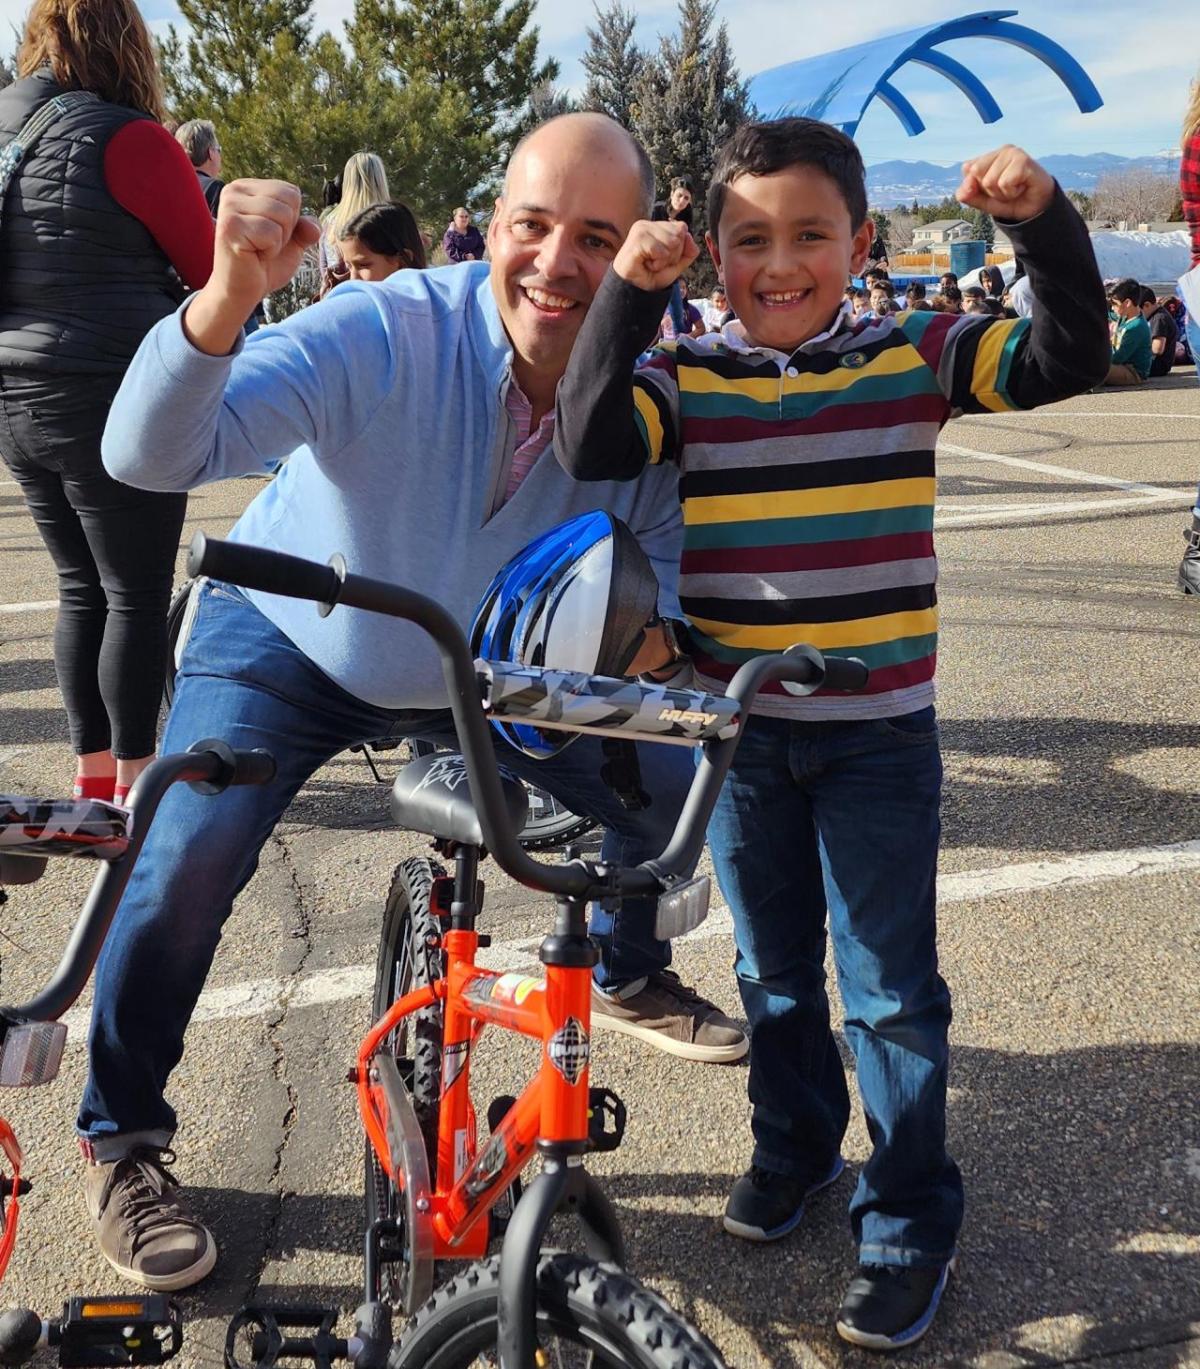 A man and a young boy pose with a bike.